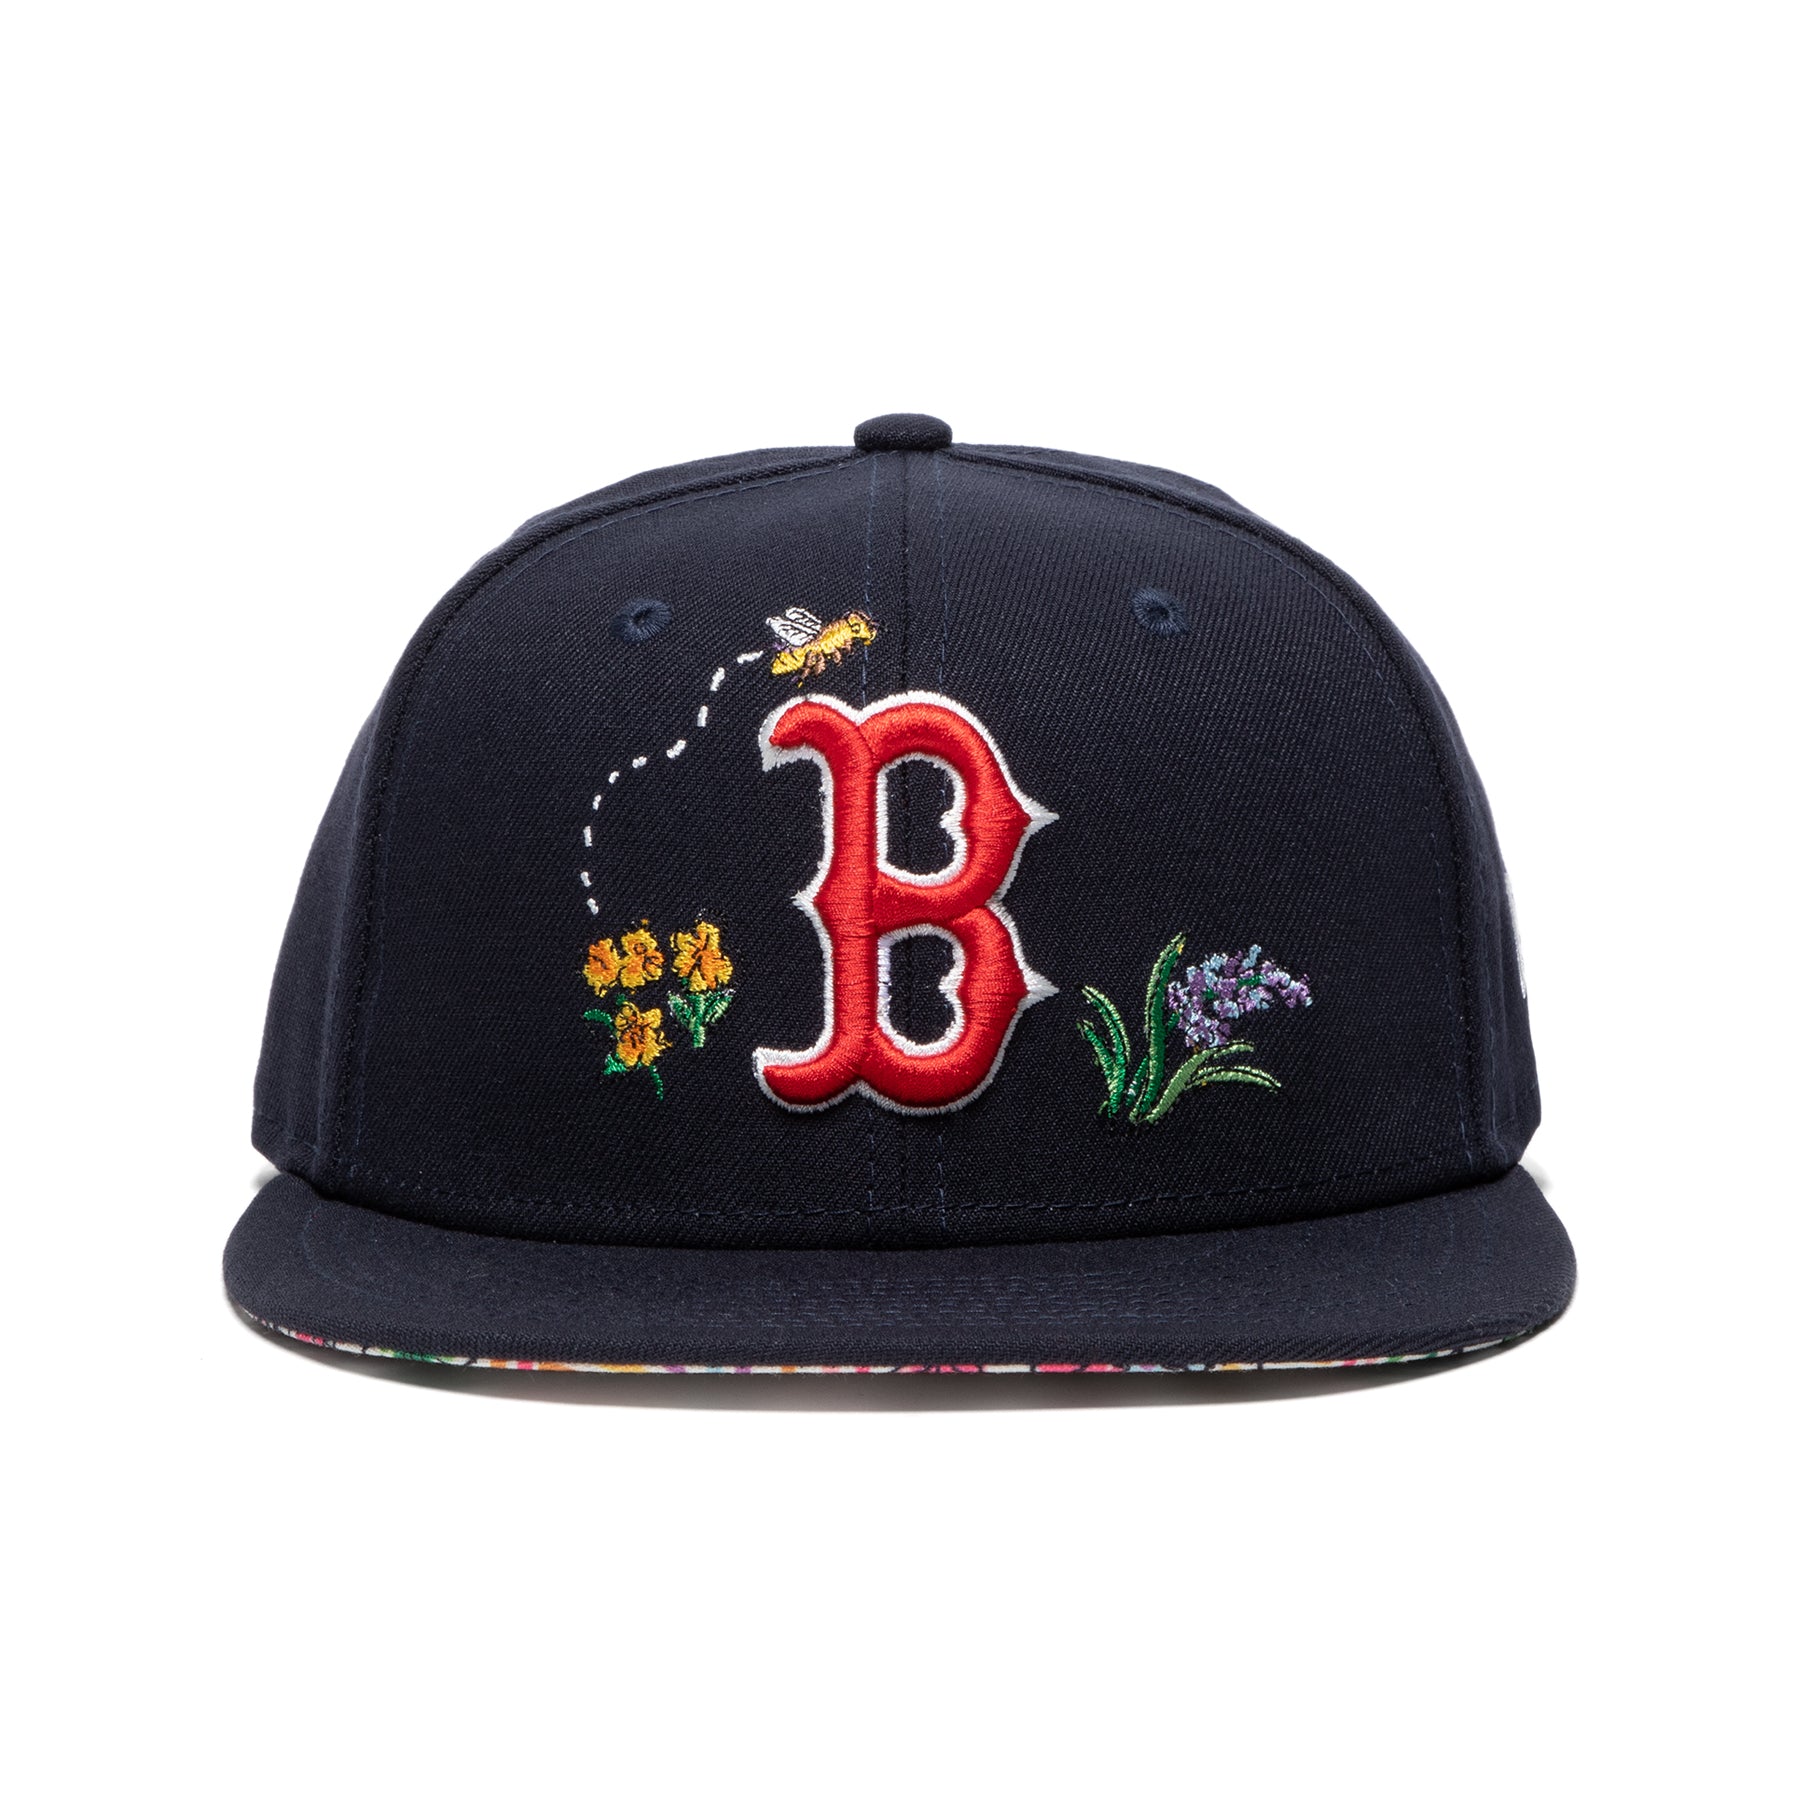 The best selling] Boston Red Sox MLB Flower All Over Print